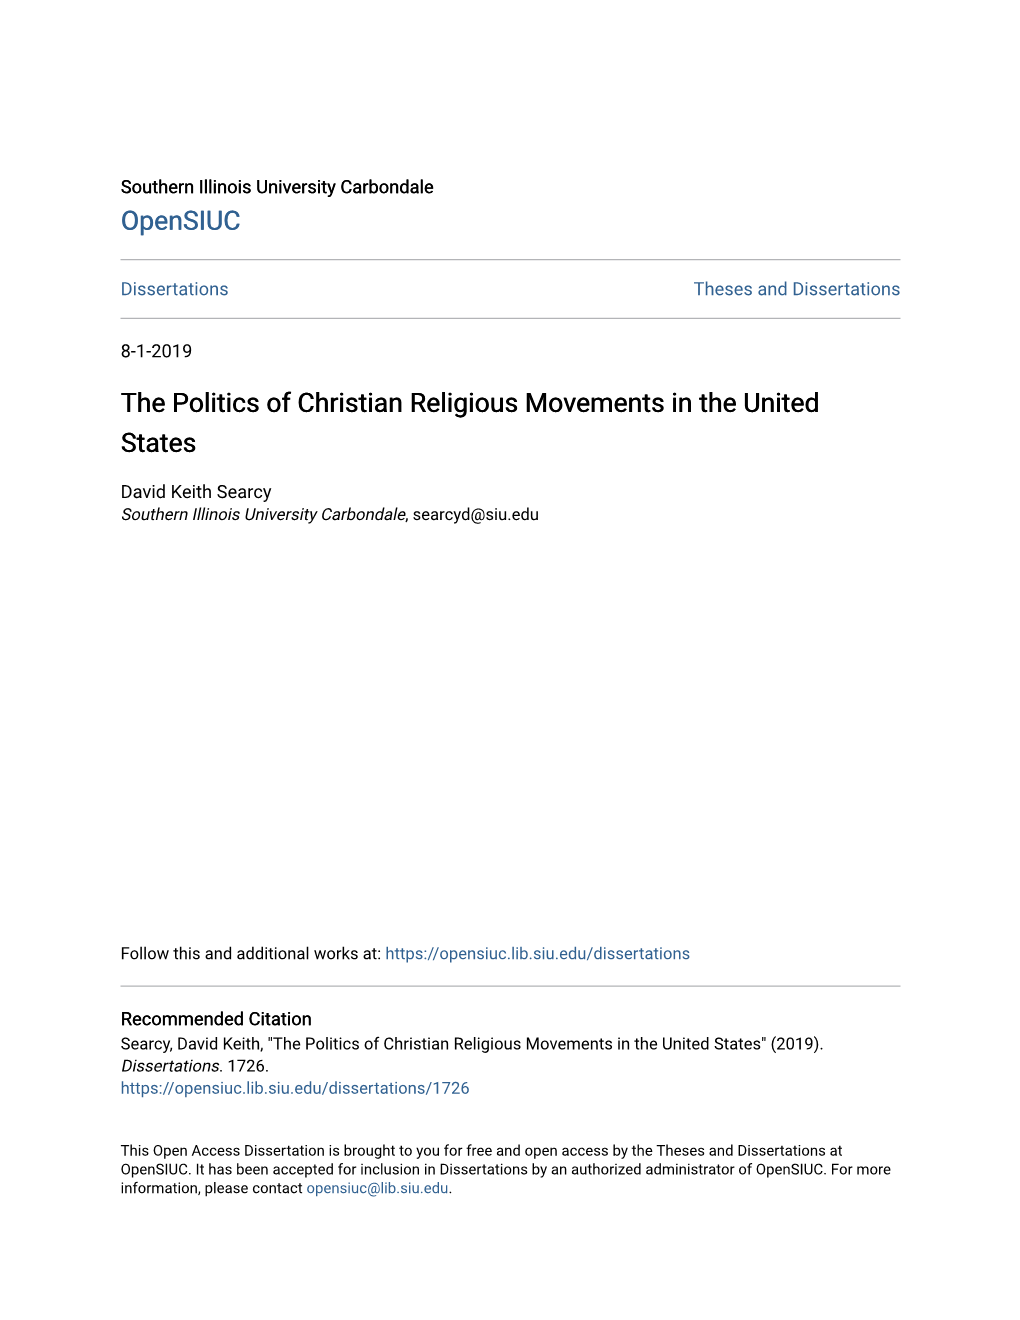 The Politics of Christian Religious Movements in the United States